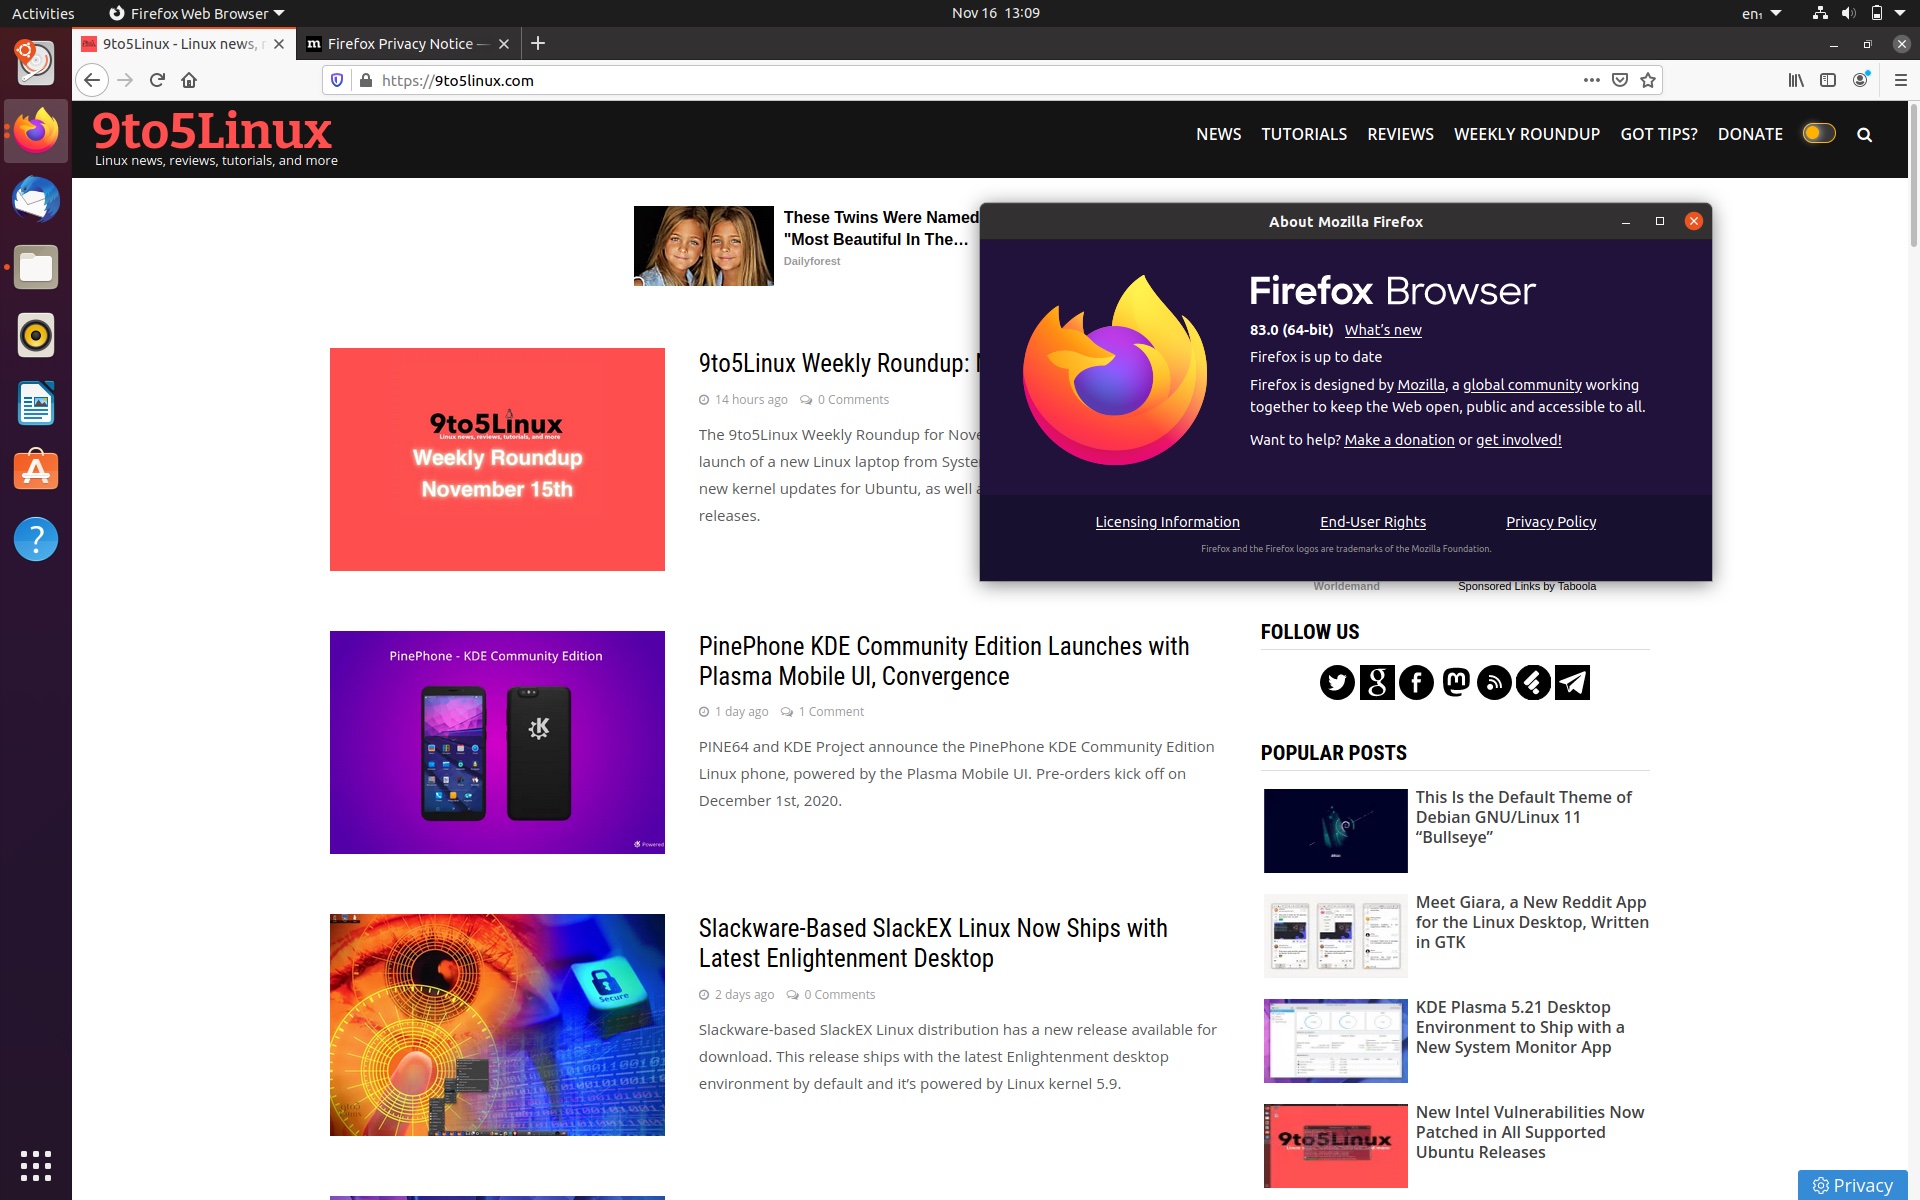 Mozilla Firefox 83 Is Now Available for Download with HTTPS-Only Mode, Improvements